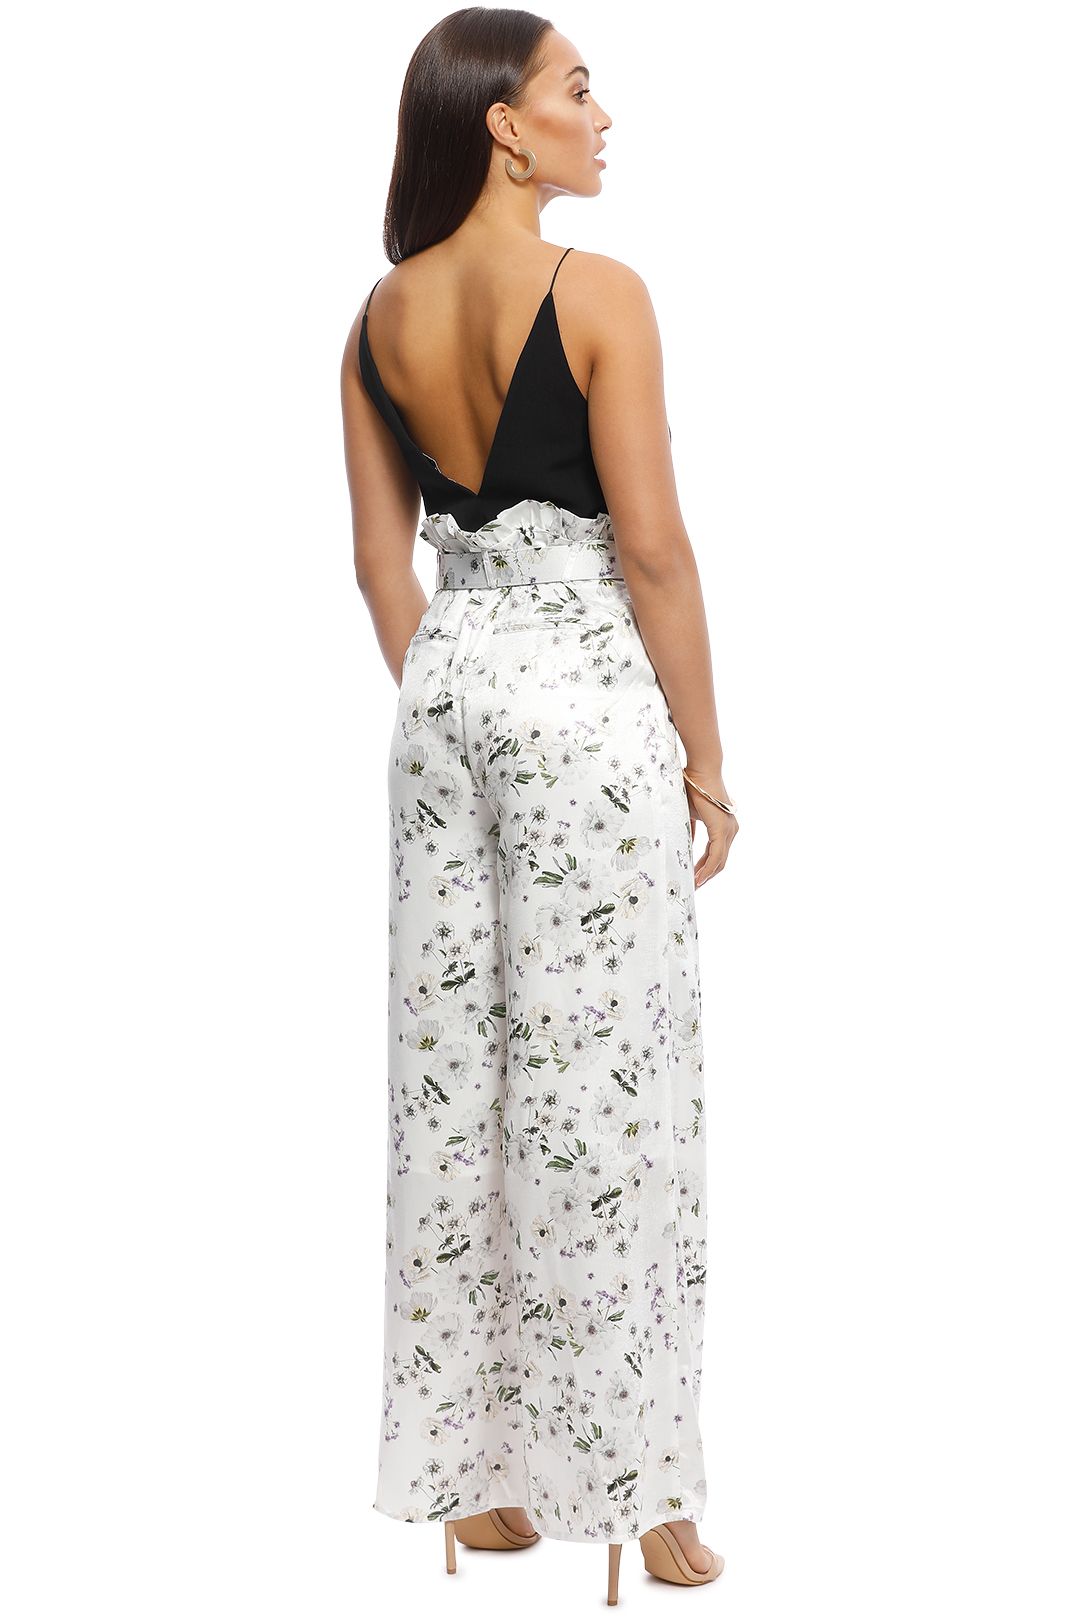 We are Kindred - Palazzo Pant - White Bouquet - Back